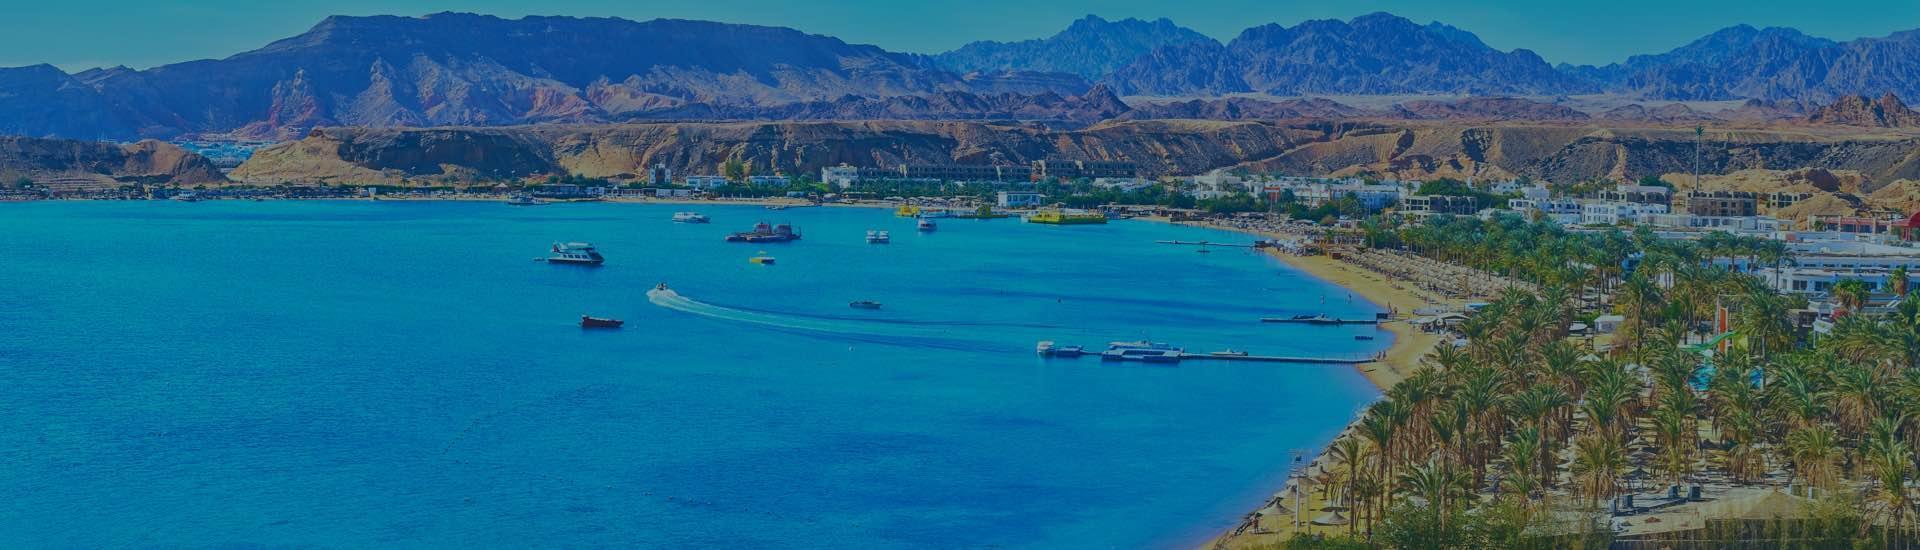 Find and Book Any Hotel in Sharm El Sheikh